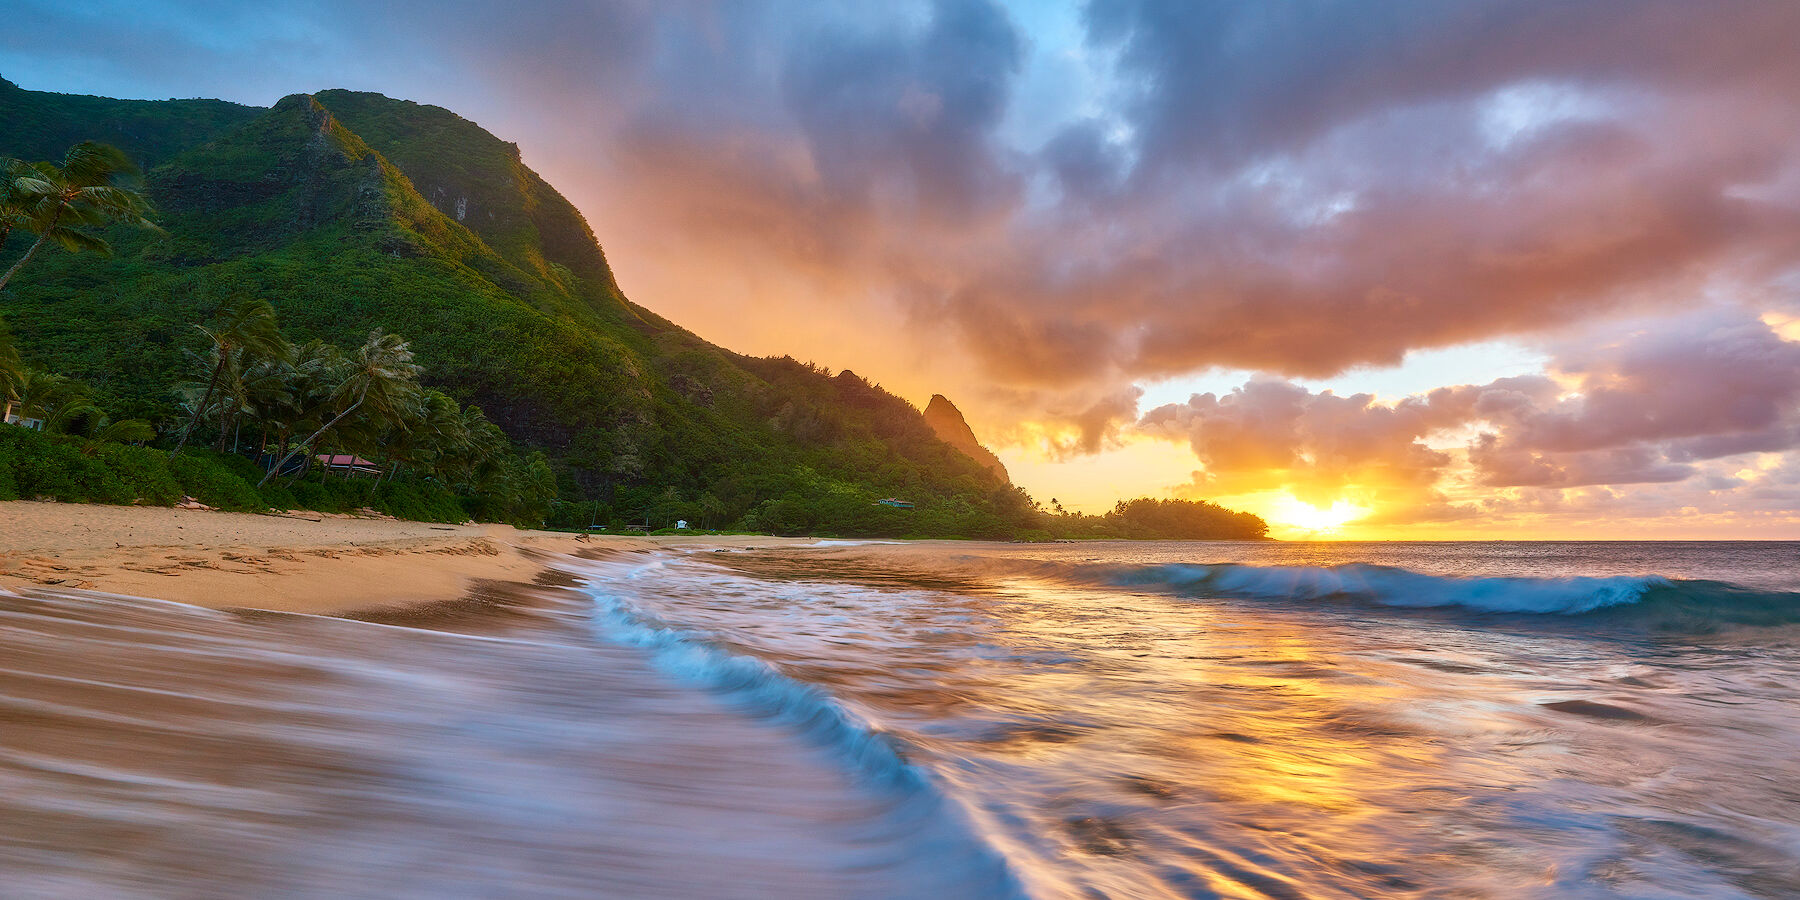 sunset at Makua Beach also known as Tunnel's Beach on the island of Kauai with a wave crashing on the beach in the foreground